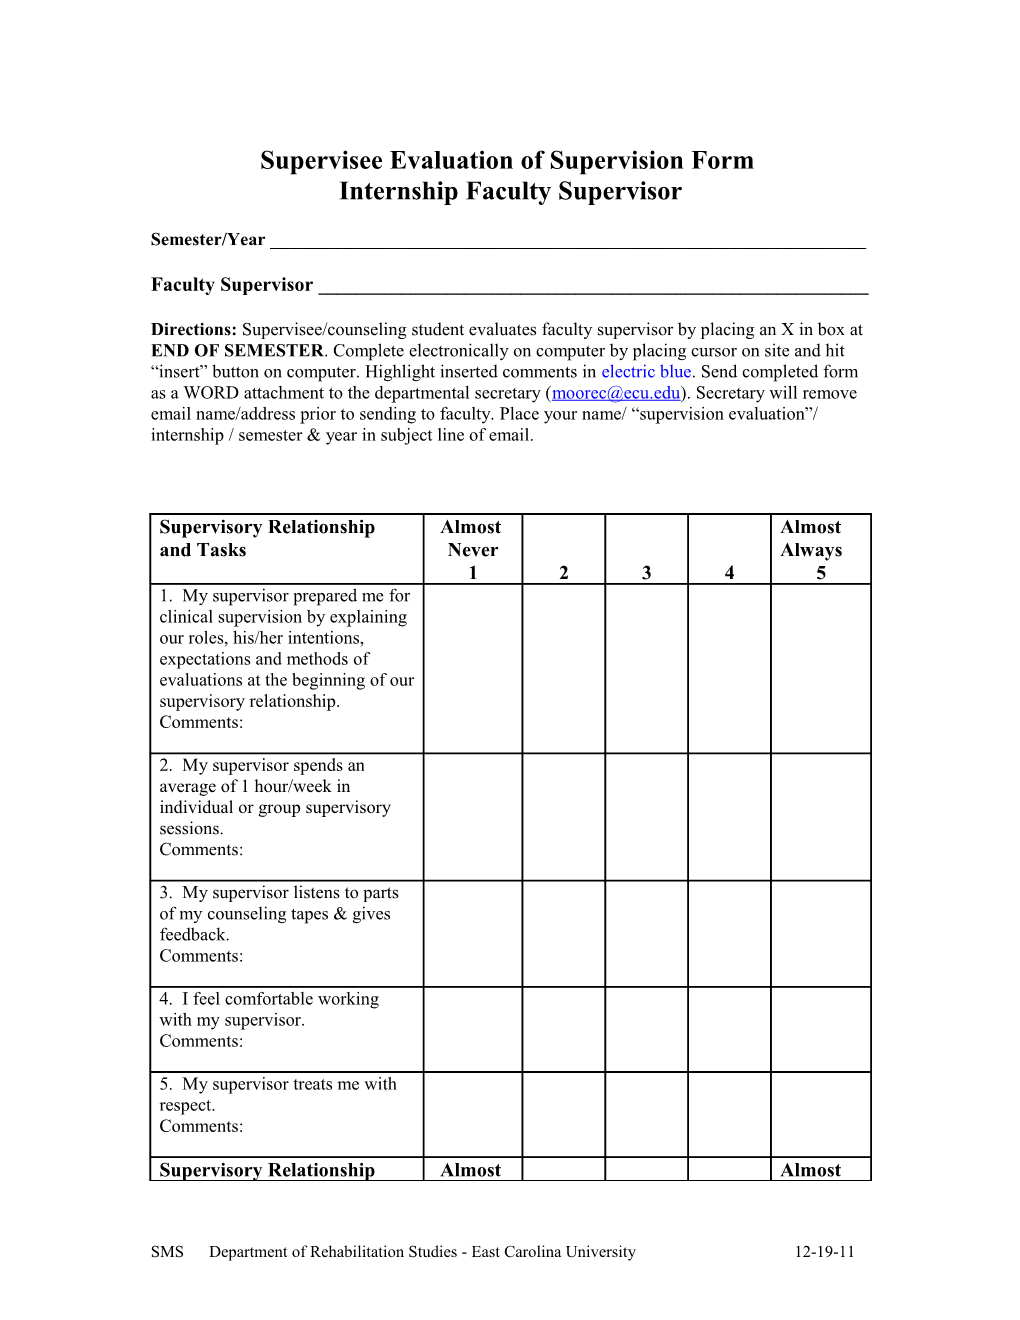 Supervisee Evaluation of Supervision Form